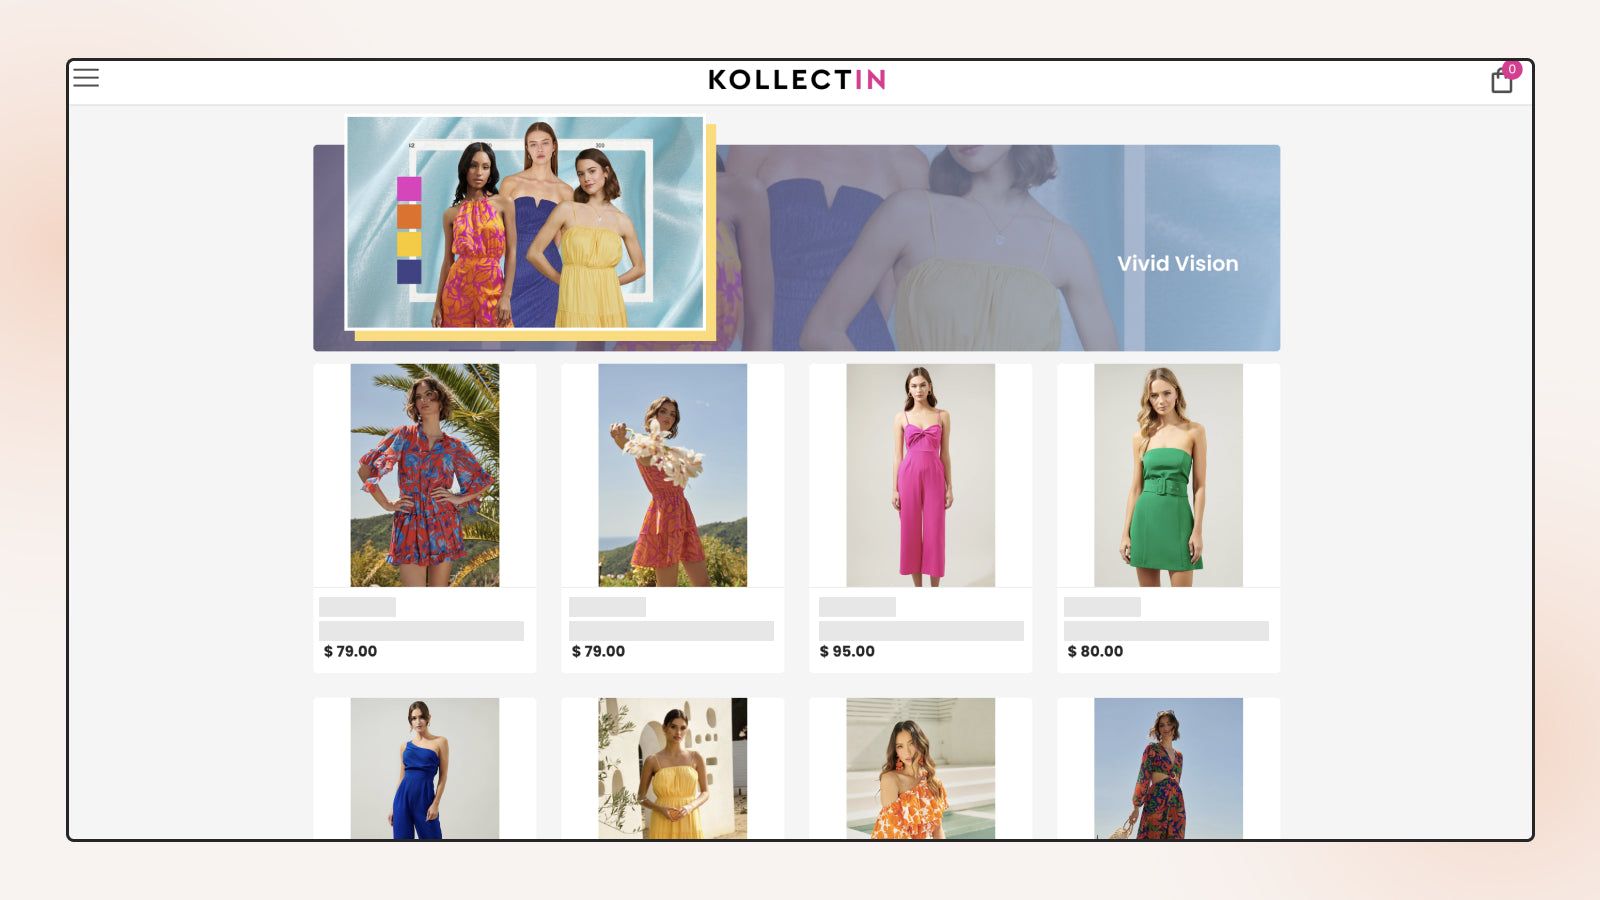 KOLLECTIN connects your brand with seller's online storefronts